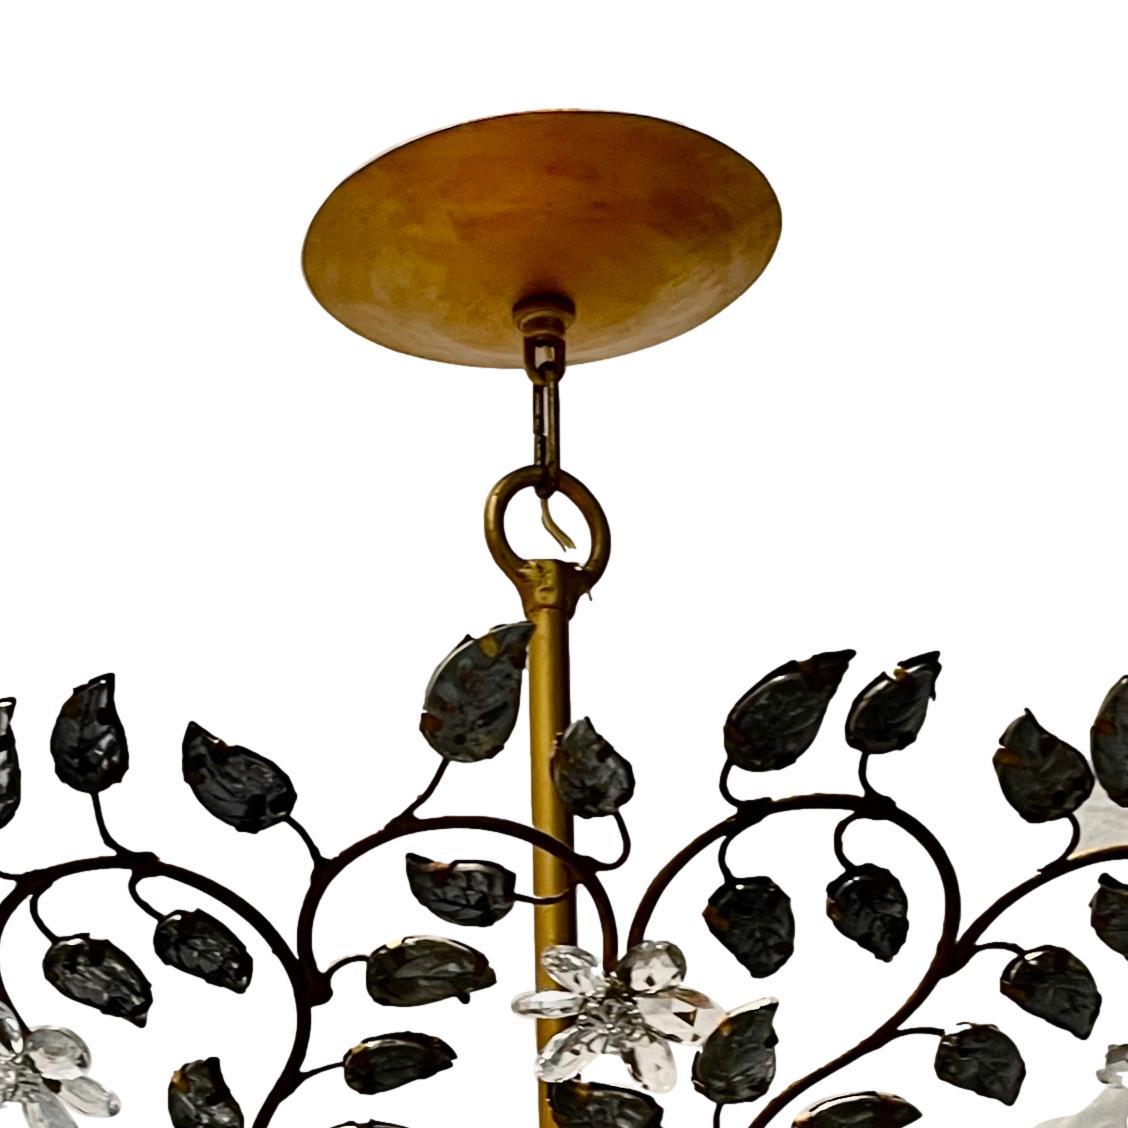 A circa 1960's French gilt light fixture with molded glass leaves on body and eight interior candelabra lights.

Measurements:
Drop: 24